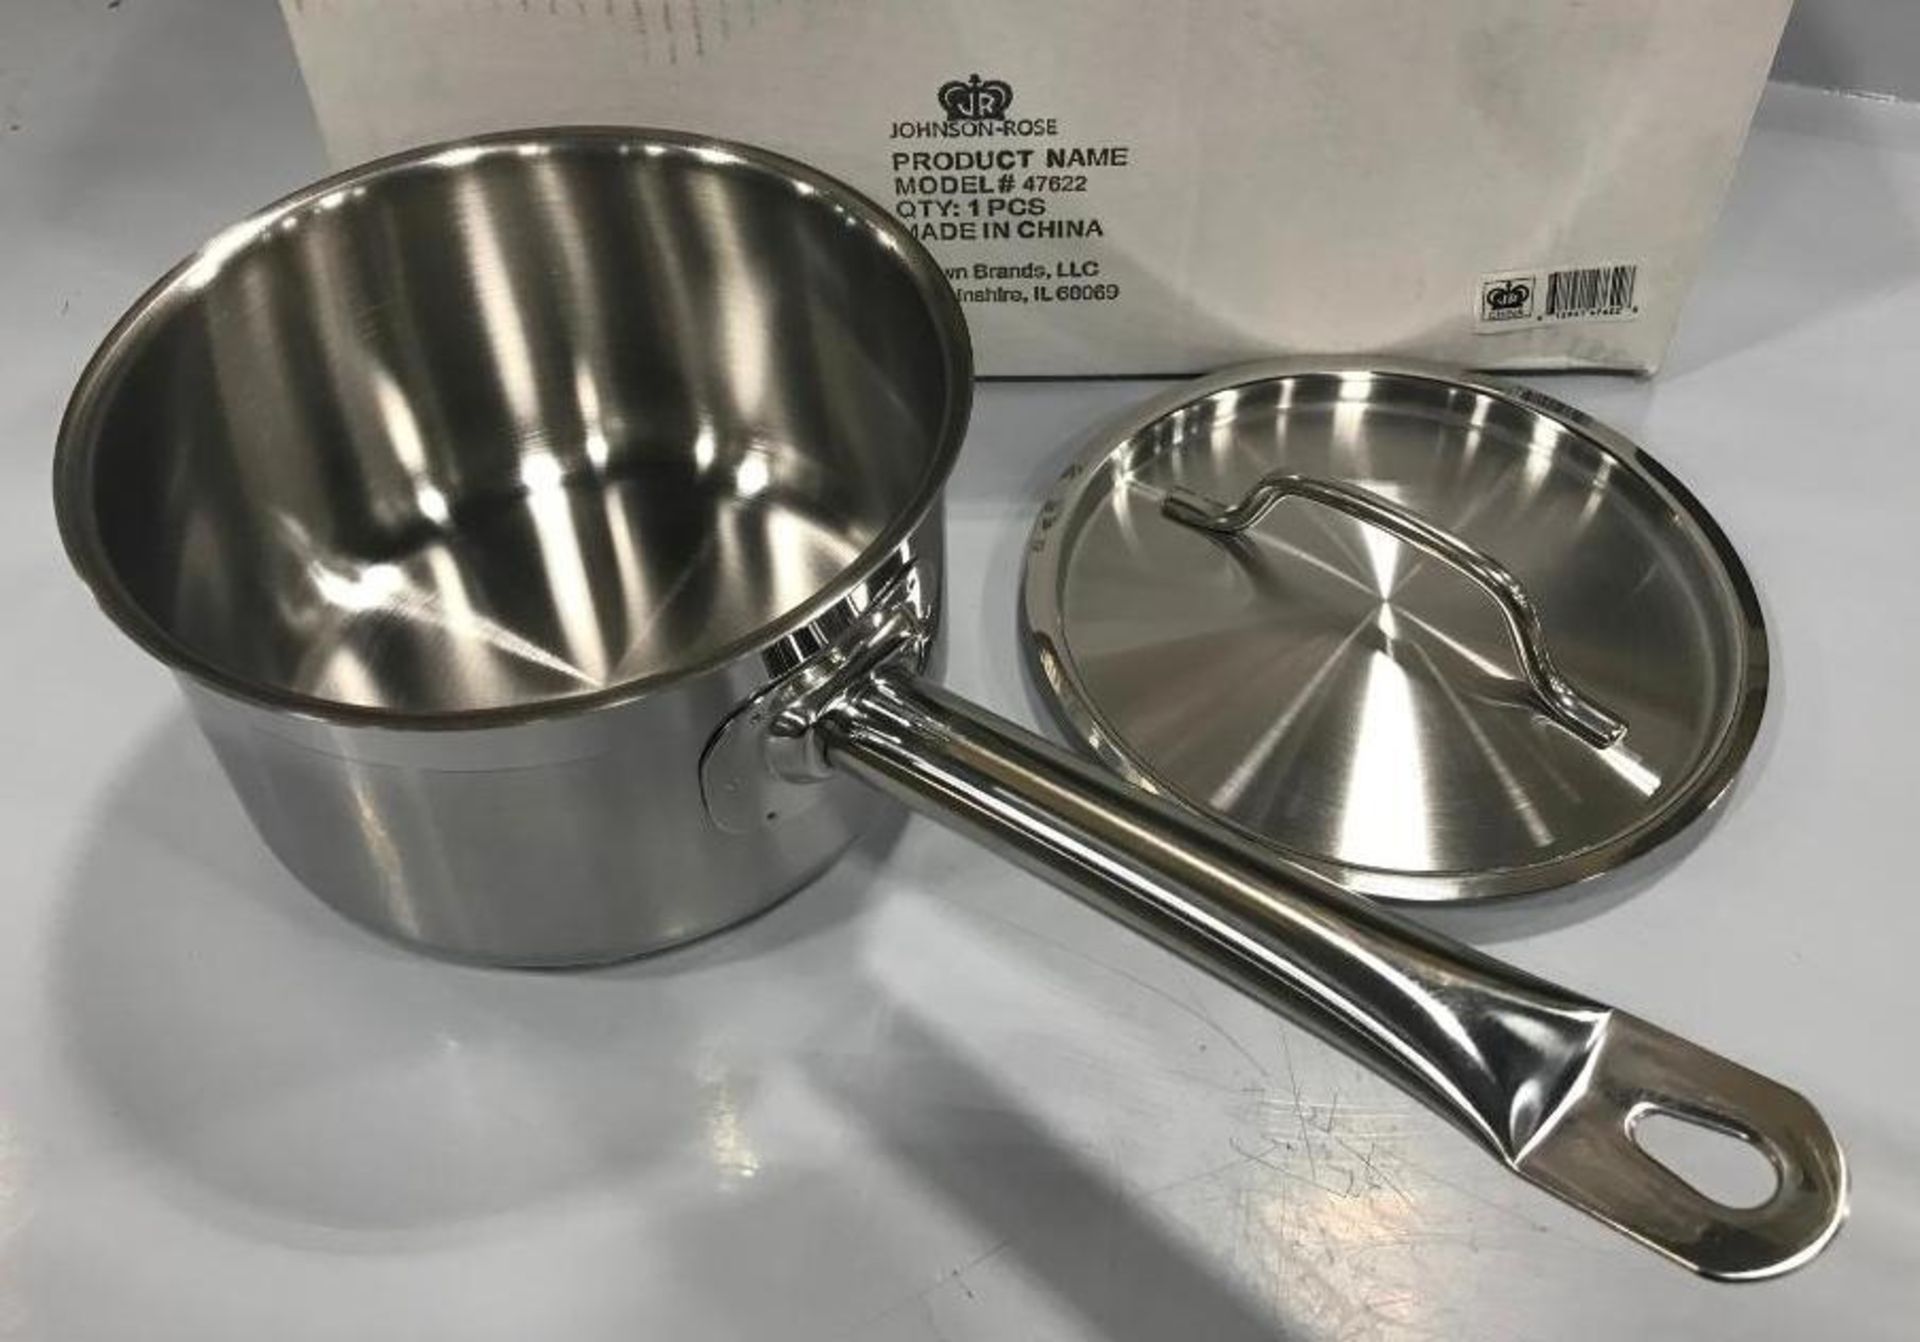 2QT HEAVY DUTY STAINLESS SAUCE PAN INDUCTION CAPABLE, JR 47622 - NEW